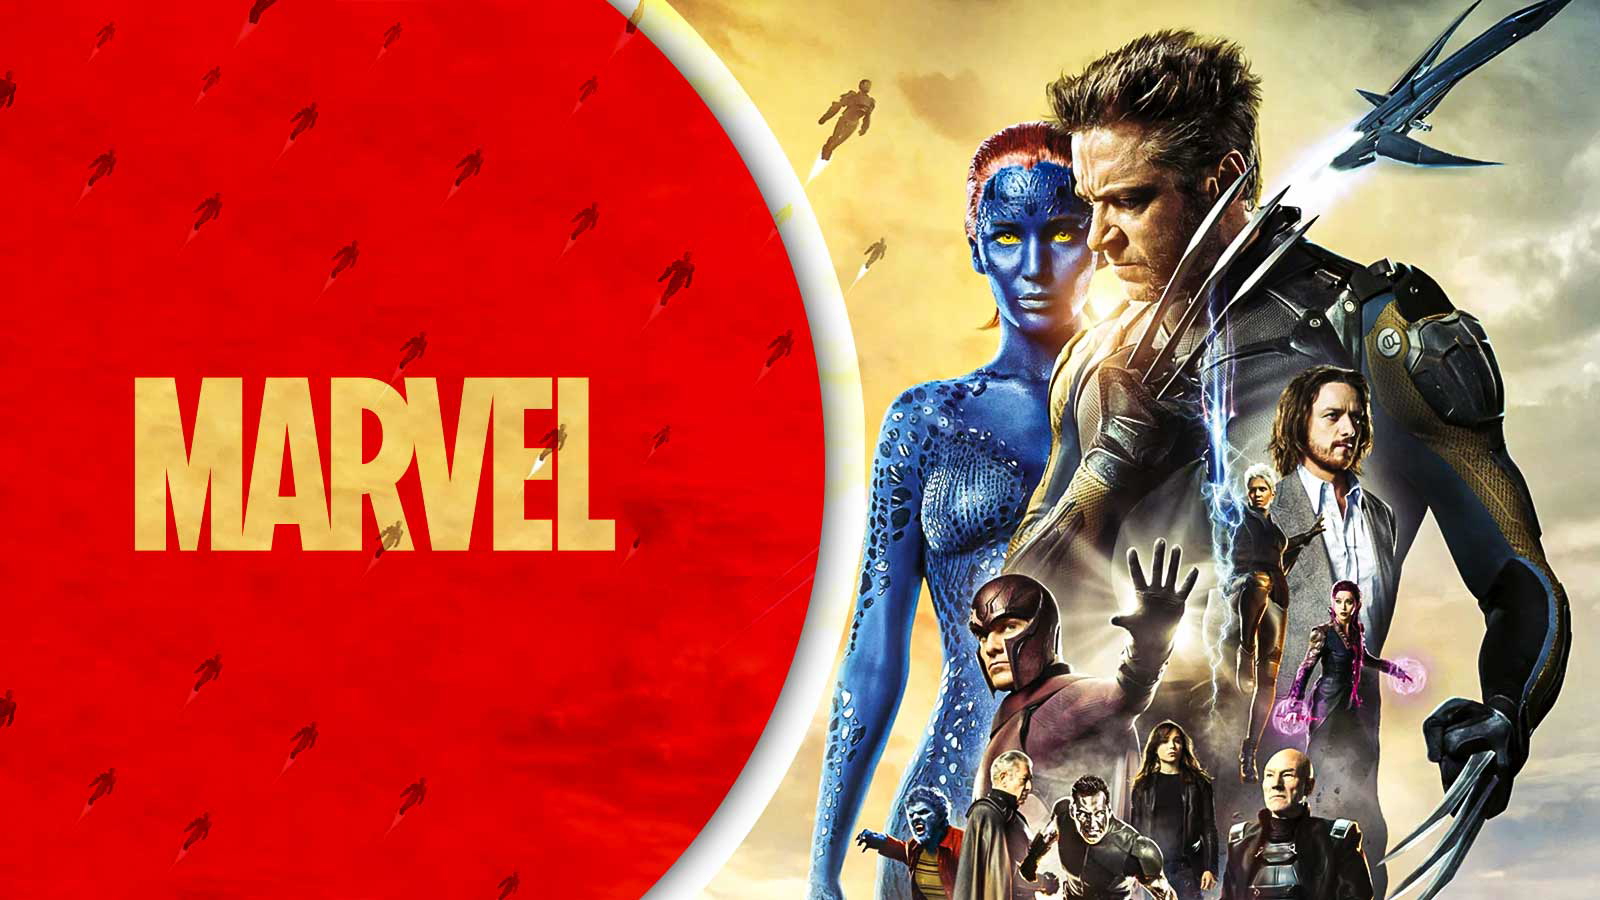 Marvel Fans Rally Behind 1 Underrated X-Men Star for MCU’s Mutant Saga After Being Nerfed in Foxverse Films